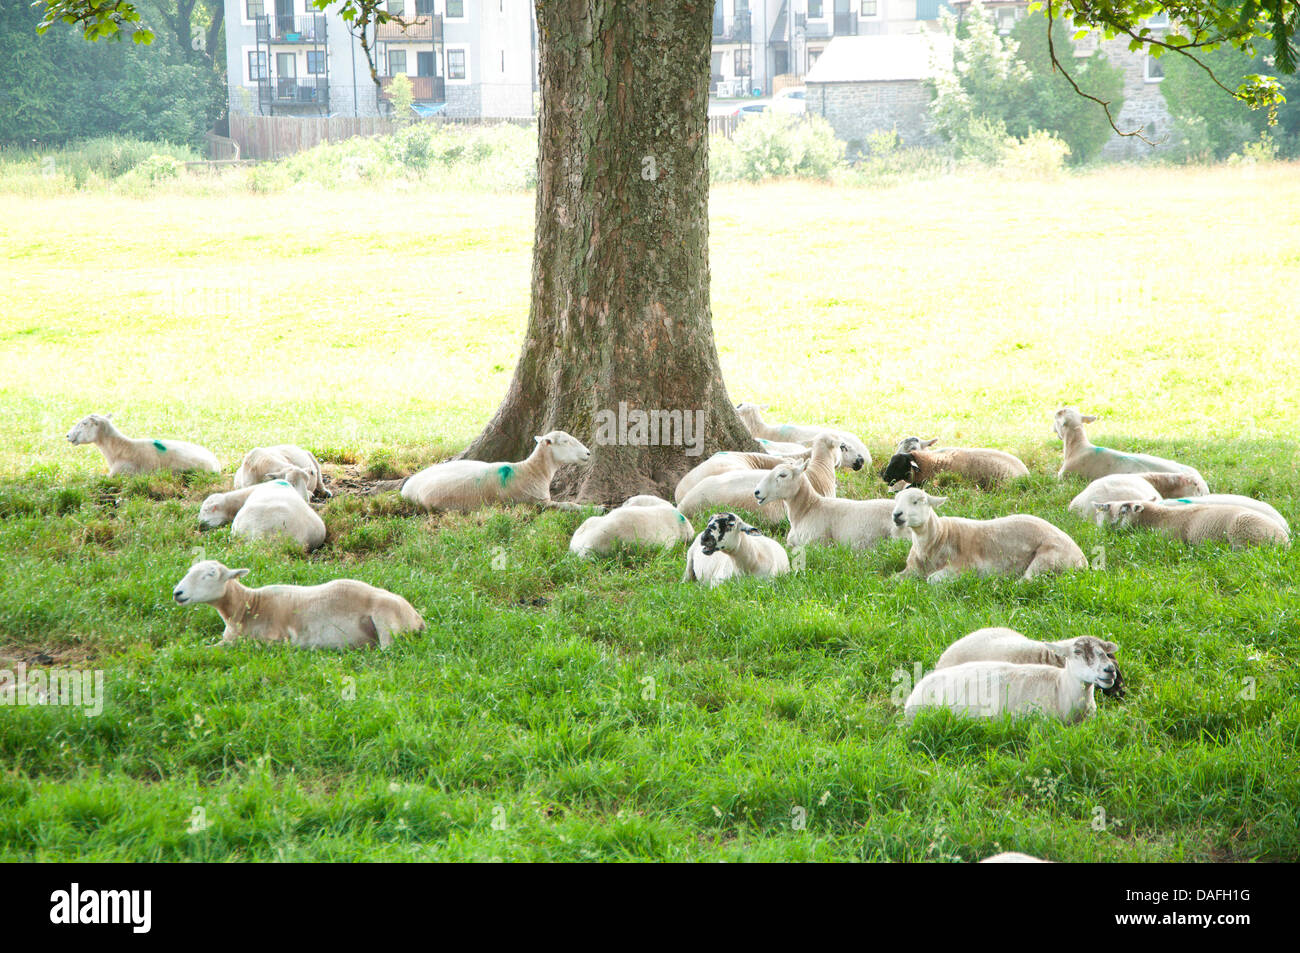 Builth Wells, Powys, UK. 12th July 2013. Sheep find welcome shelter from the blazing sun and oppressive heat under a solitary tree. Temperatures in Mid Wales rose to 28deg Celsius this morning. There are thunderstorms forecast this evening for Mid Wales and The Brecon Beacons National Park. Photo credit: Graham M. Lawrence/Alamy Live News Stock Photo